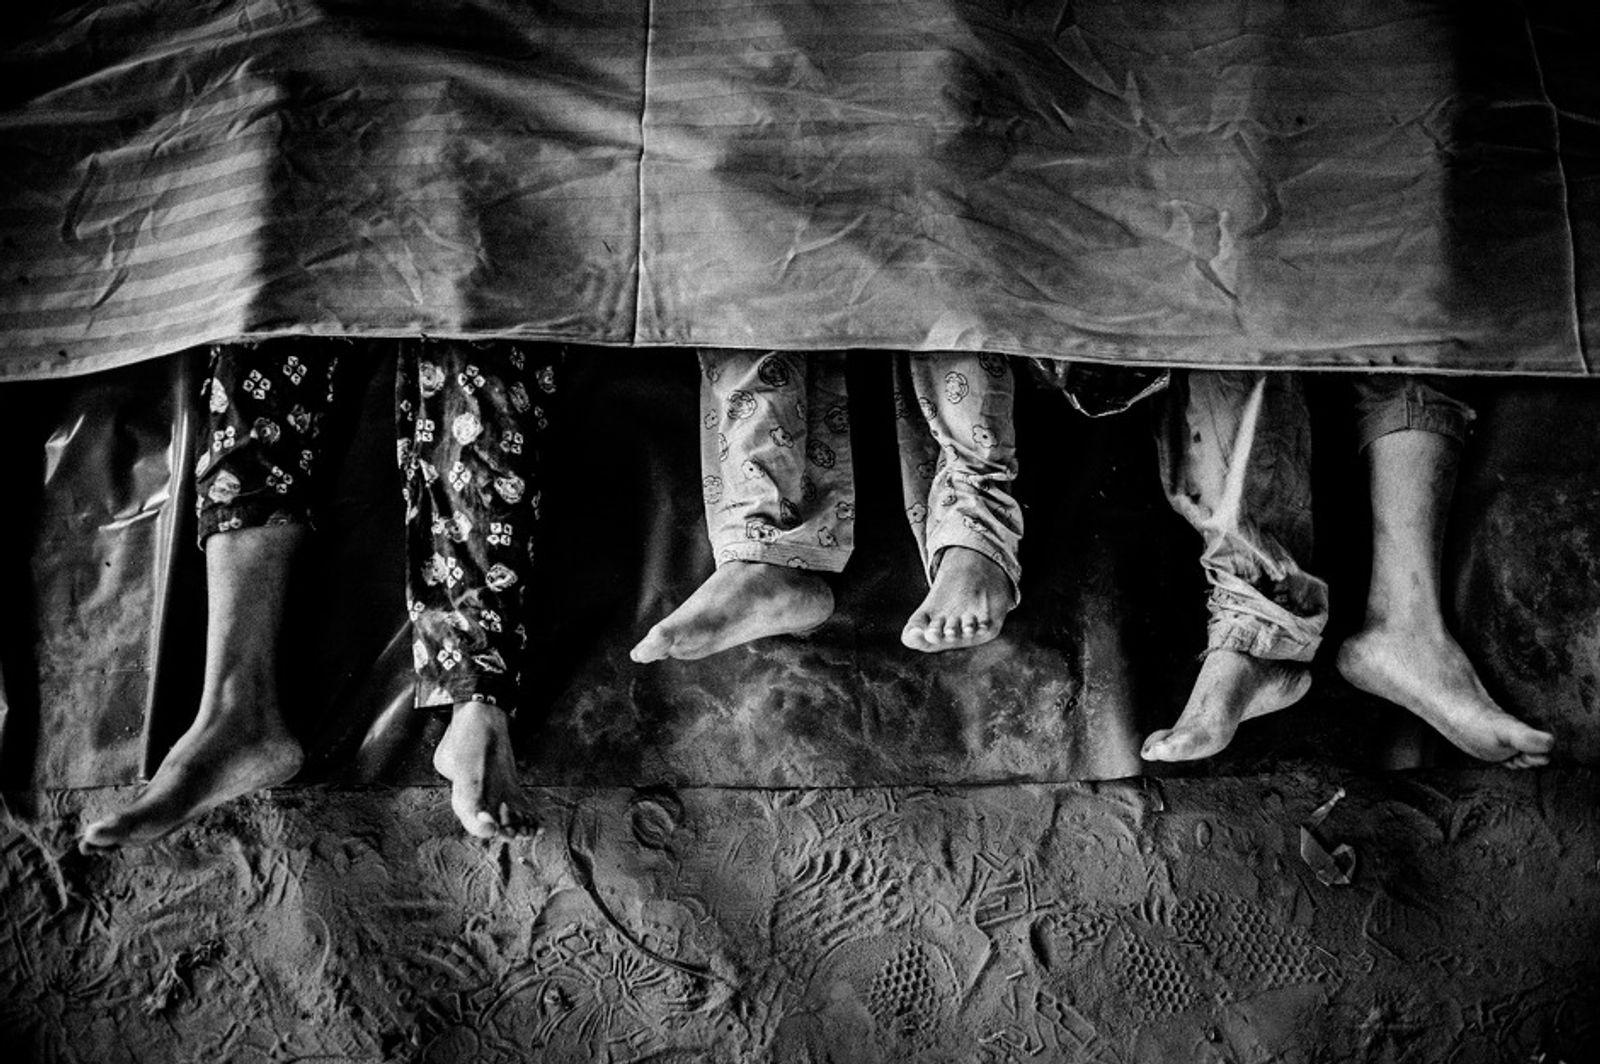 © Rahul Talukder - Lifeless bodies of the victims of Rana Plaza lie in the hospital morgue.